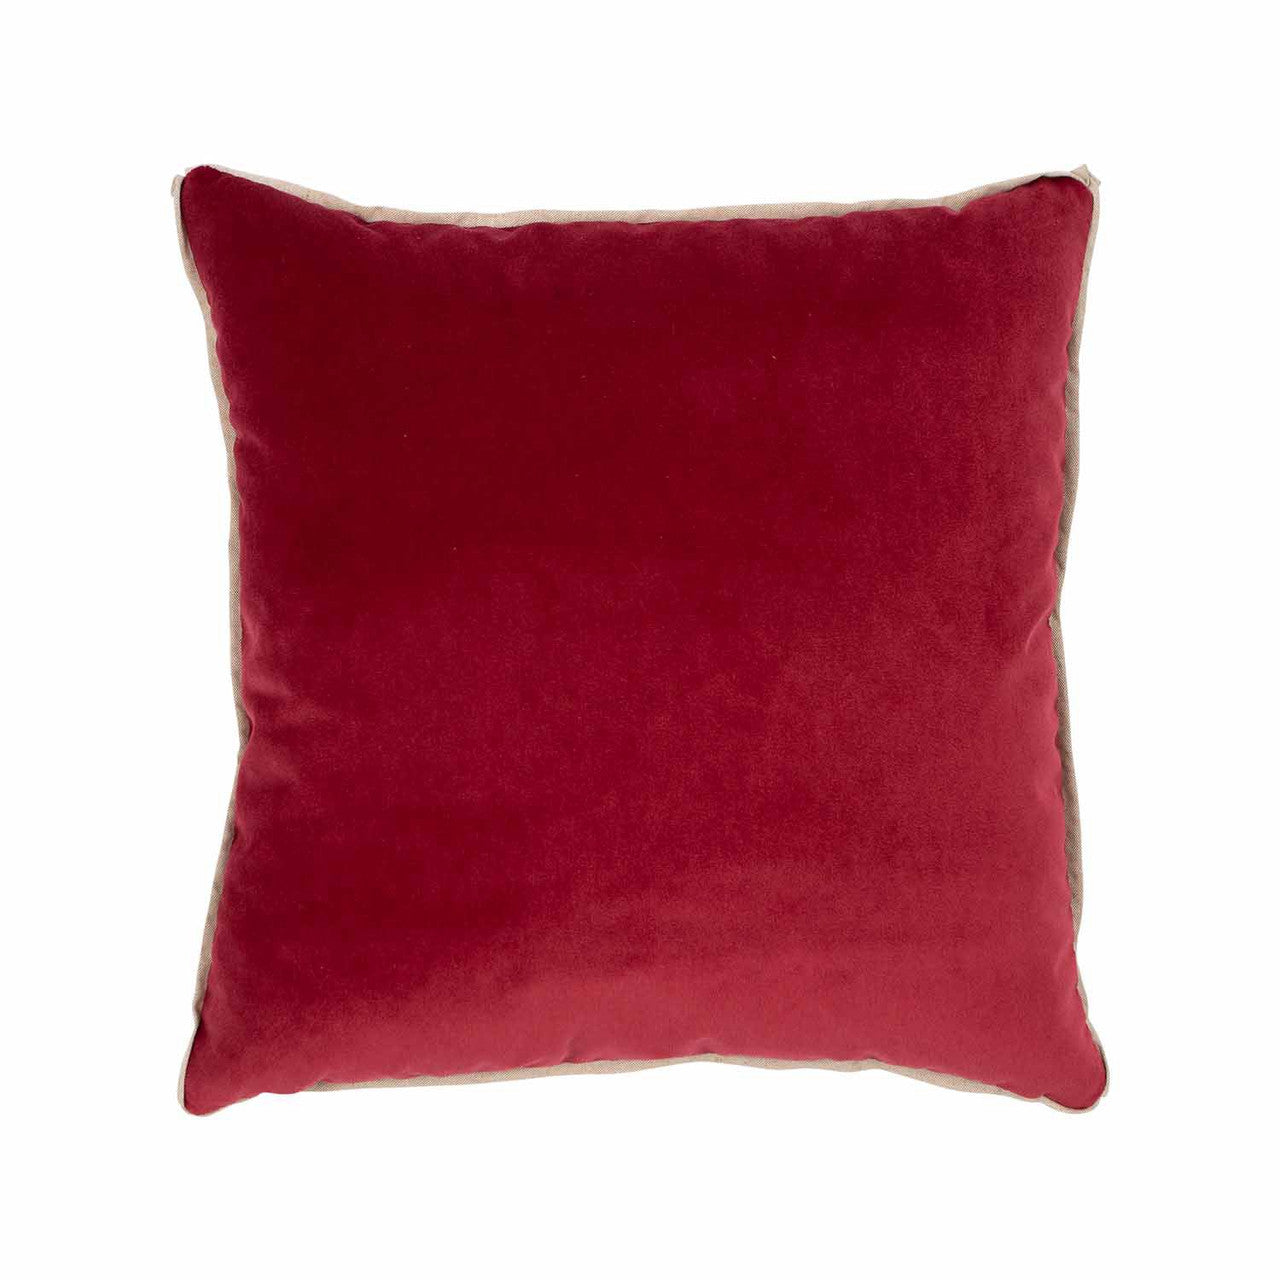 Banks Pillow in Lipstick